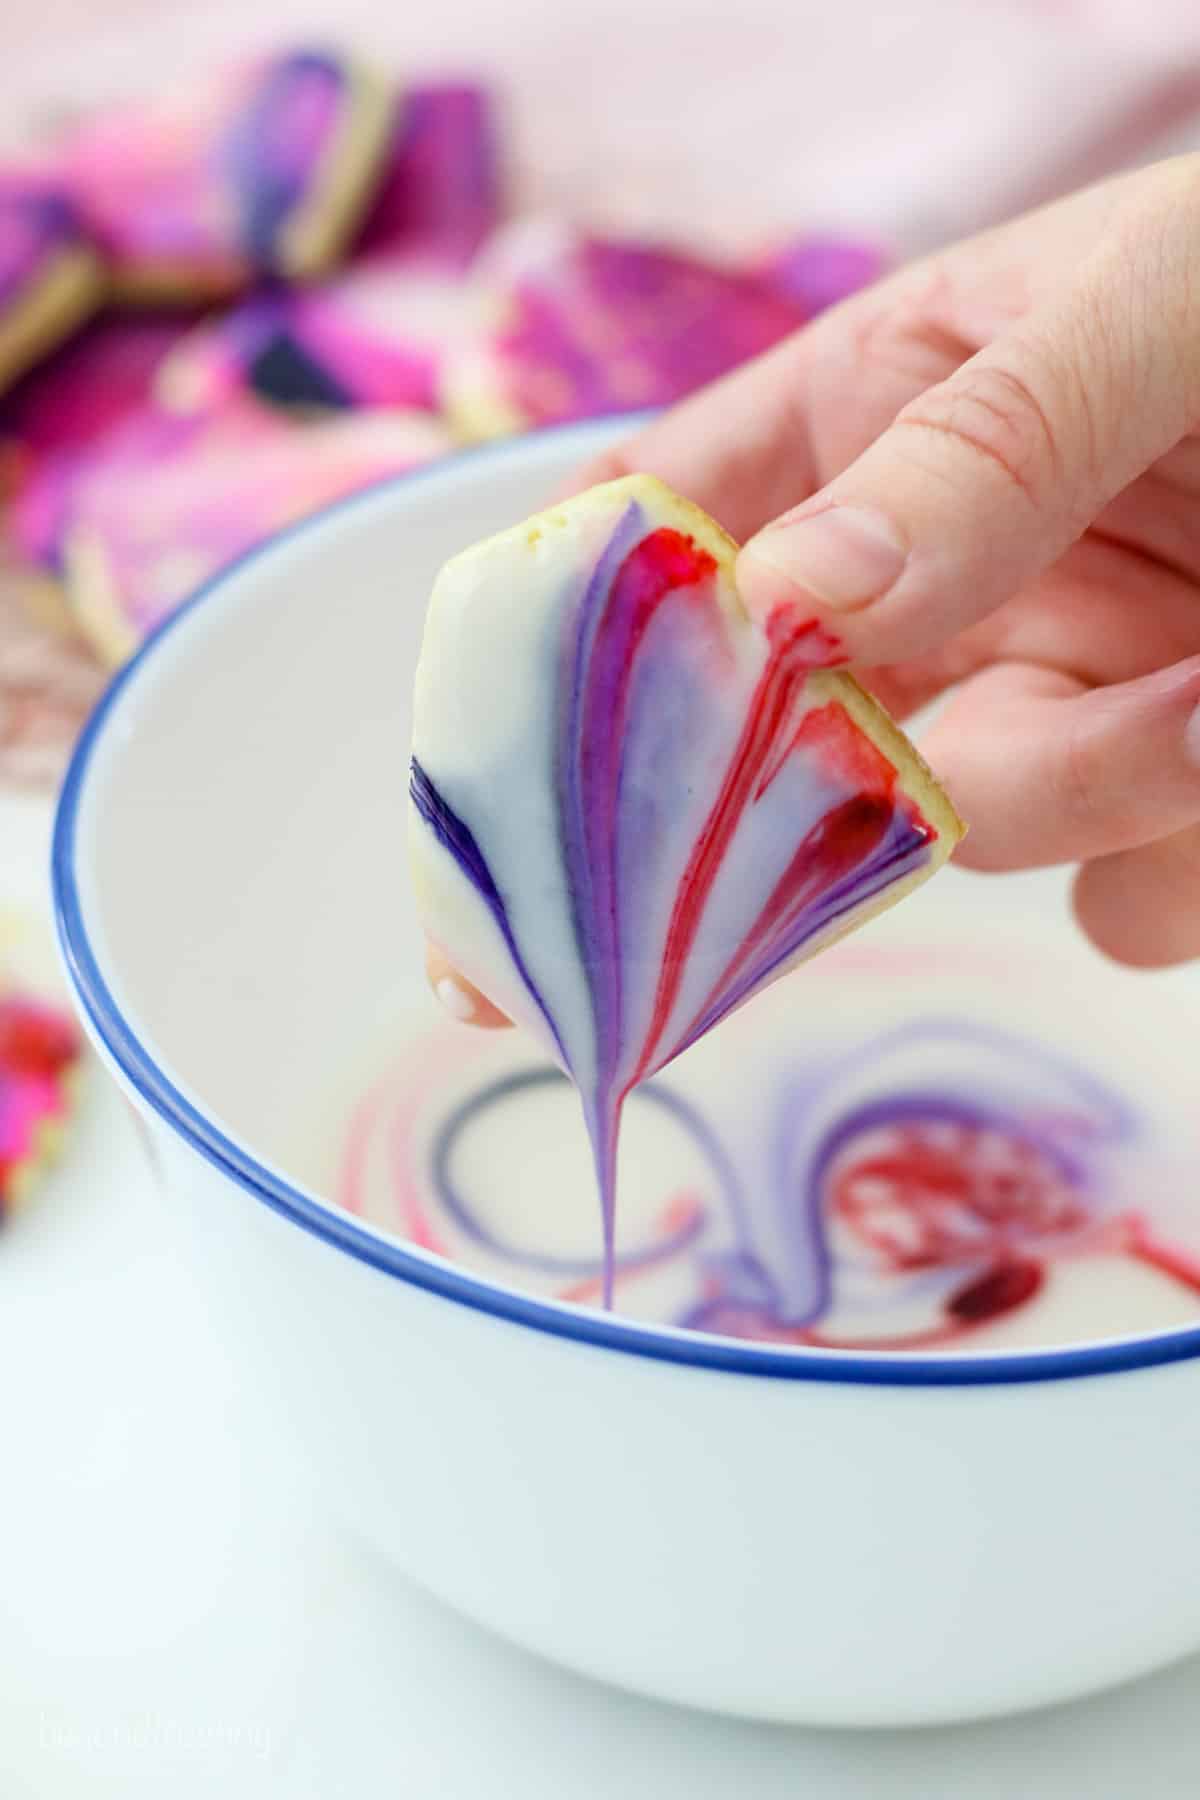 A hand dipping a heart-shaped sugar cookie into a bowl of marbled icing.